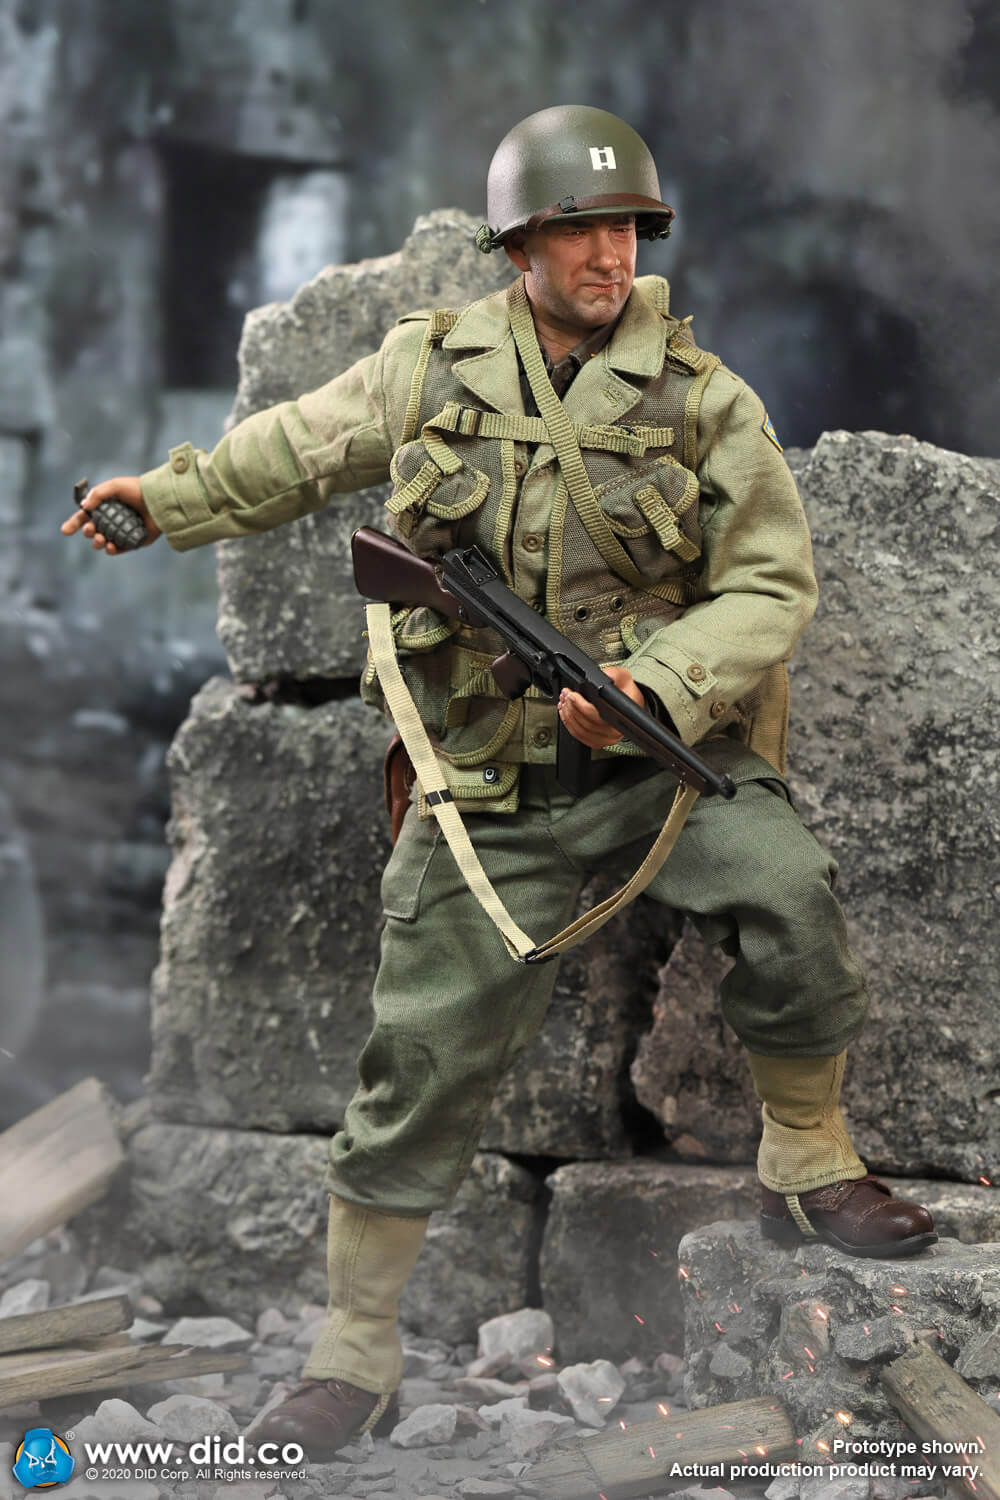 WWII - NEW PRODUCT: DiD: A80145 1/6 scale WWII US 2nd Ranger Battalion Series 3 Captain Miller 16199